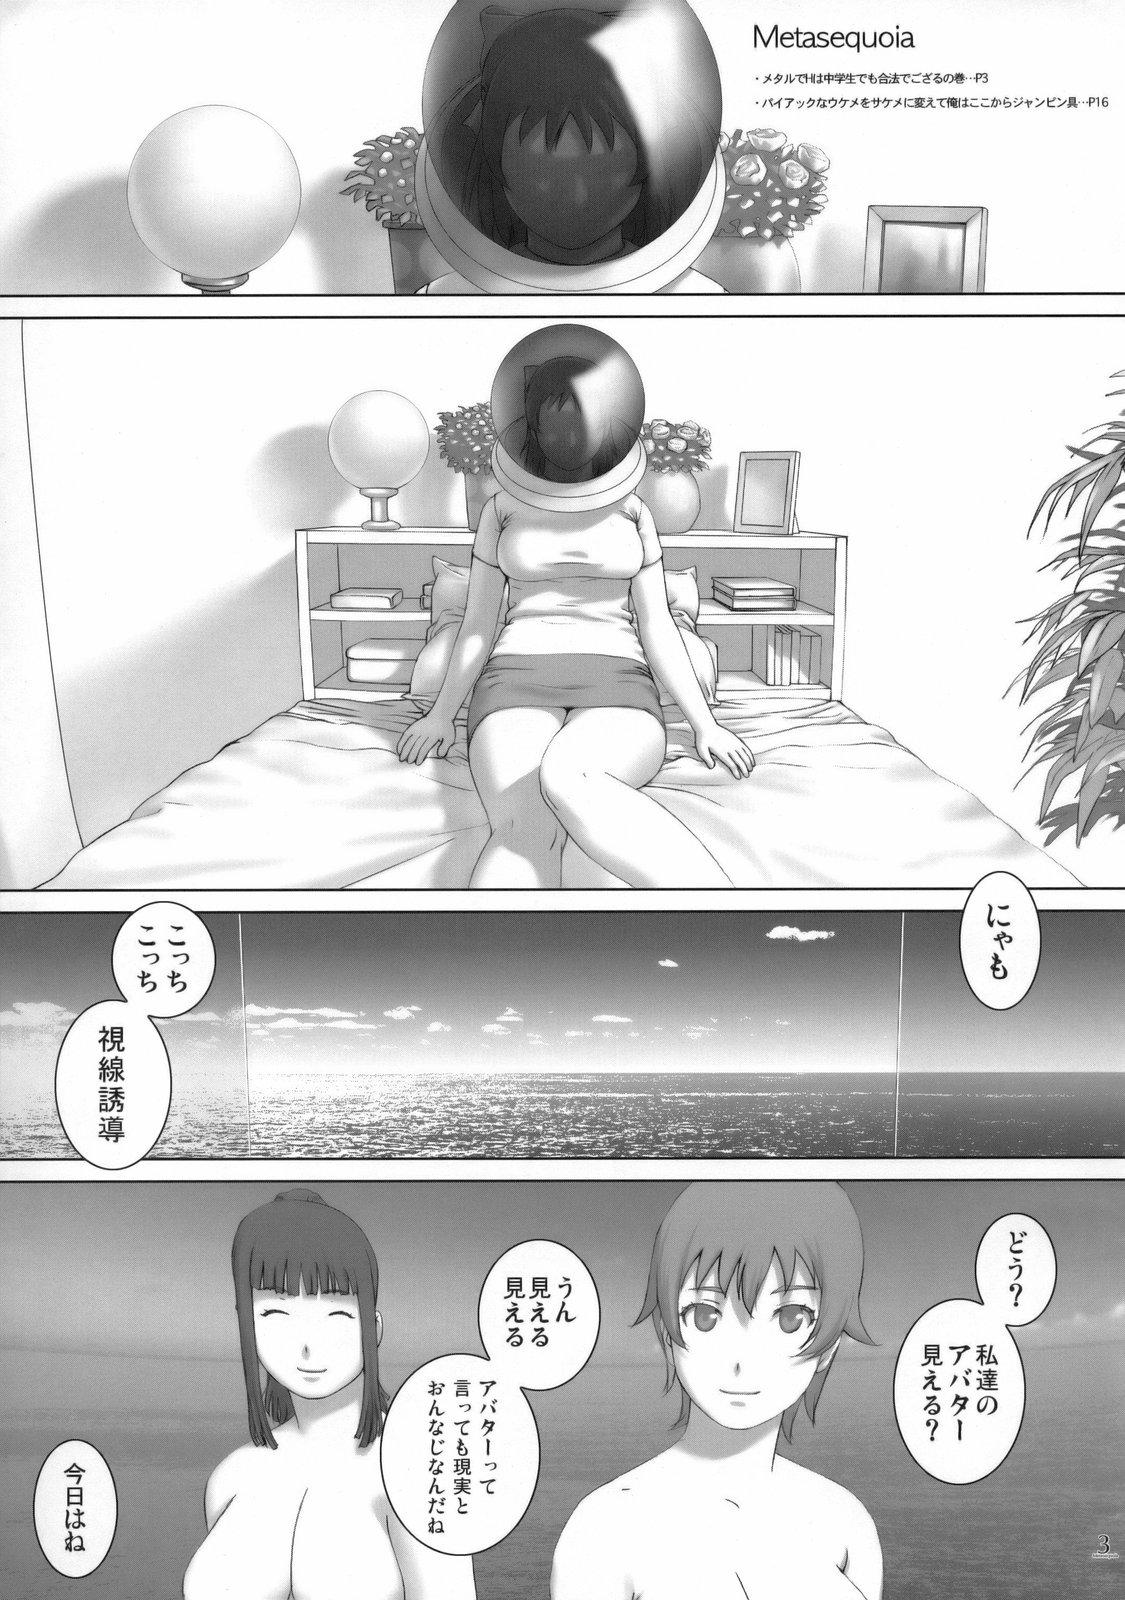 Analplay Metasequoia - Real drive Massage Sex - Page 2